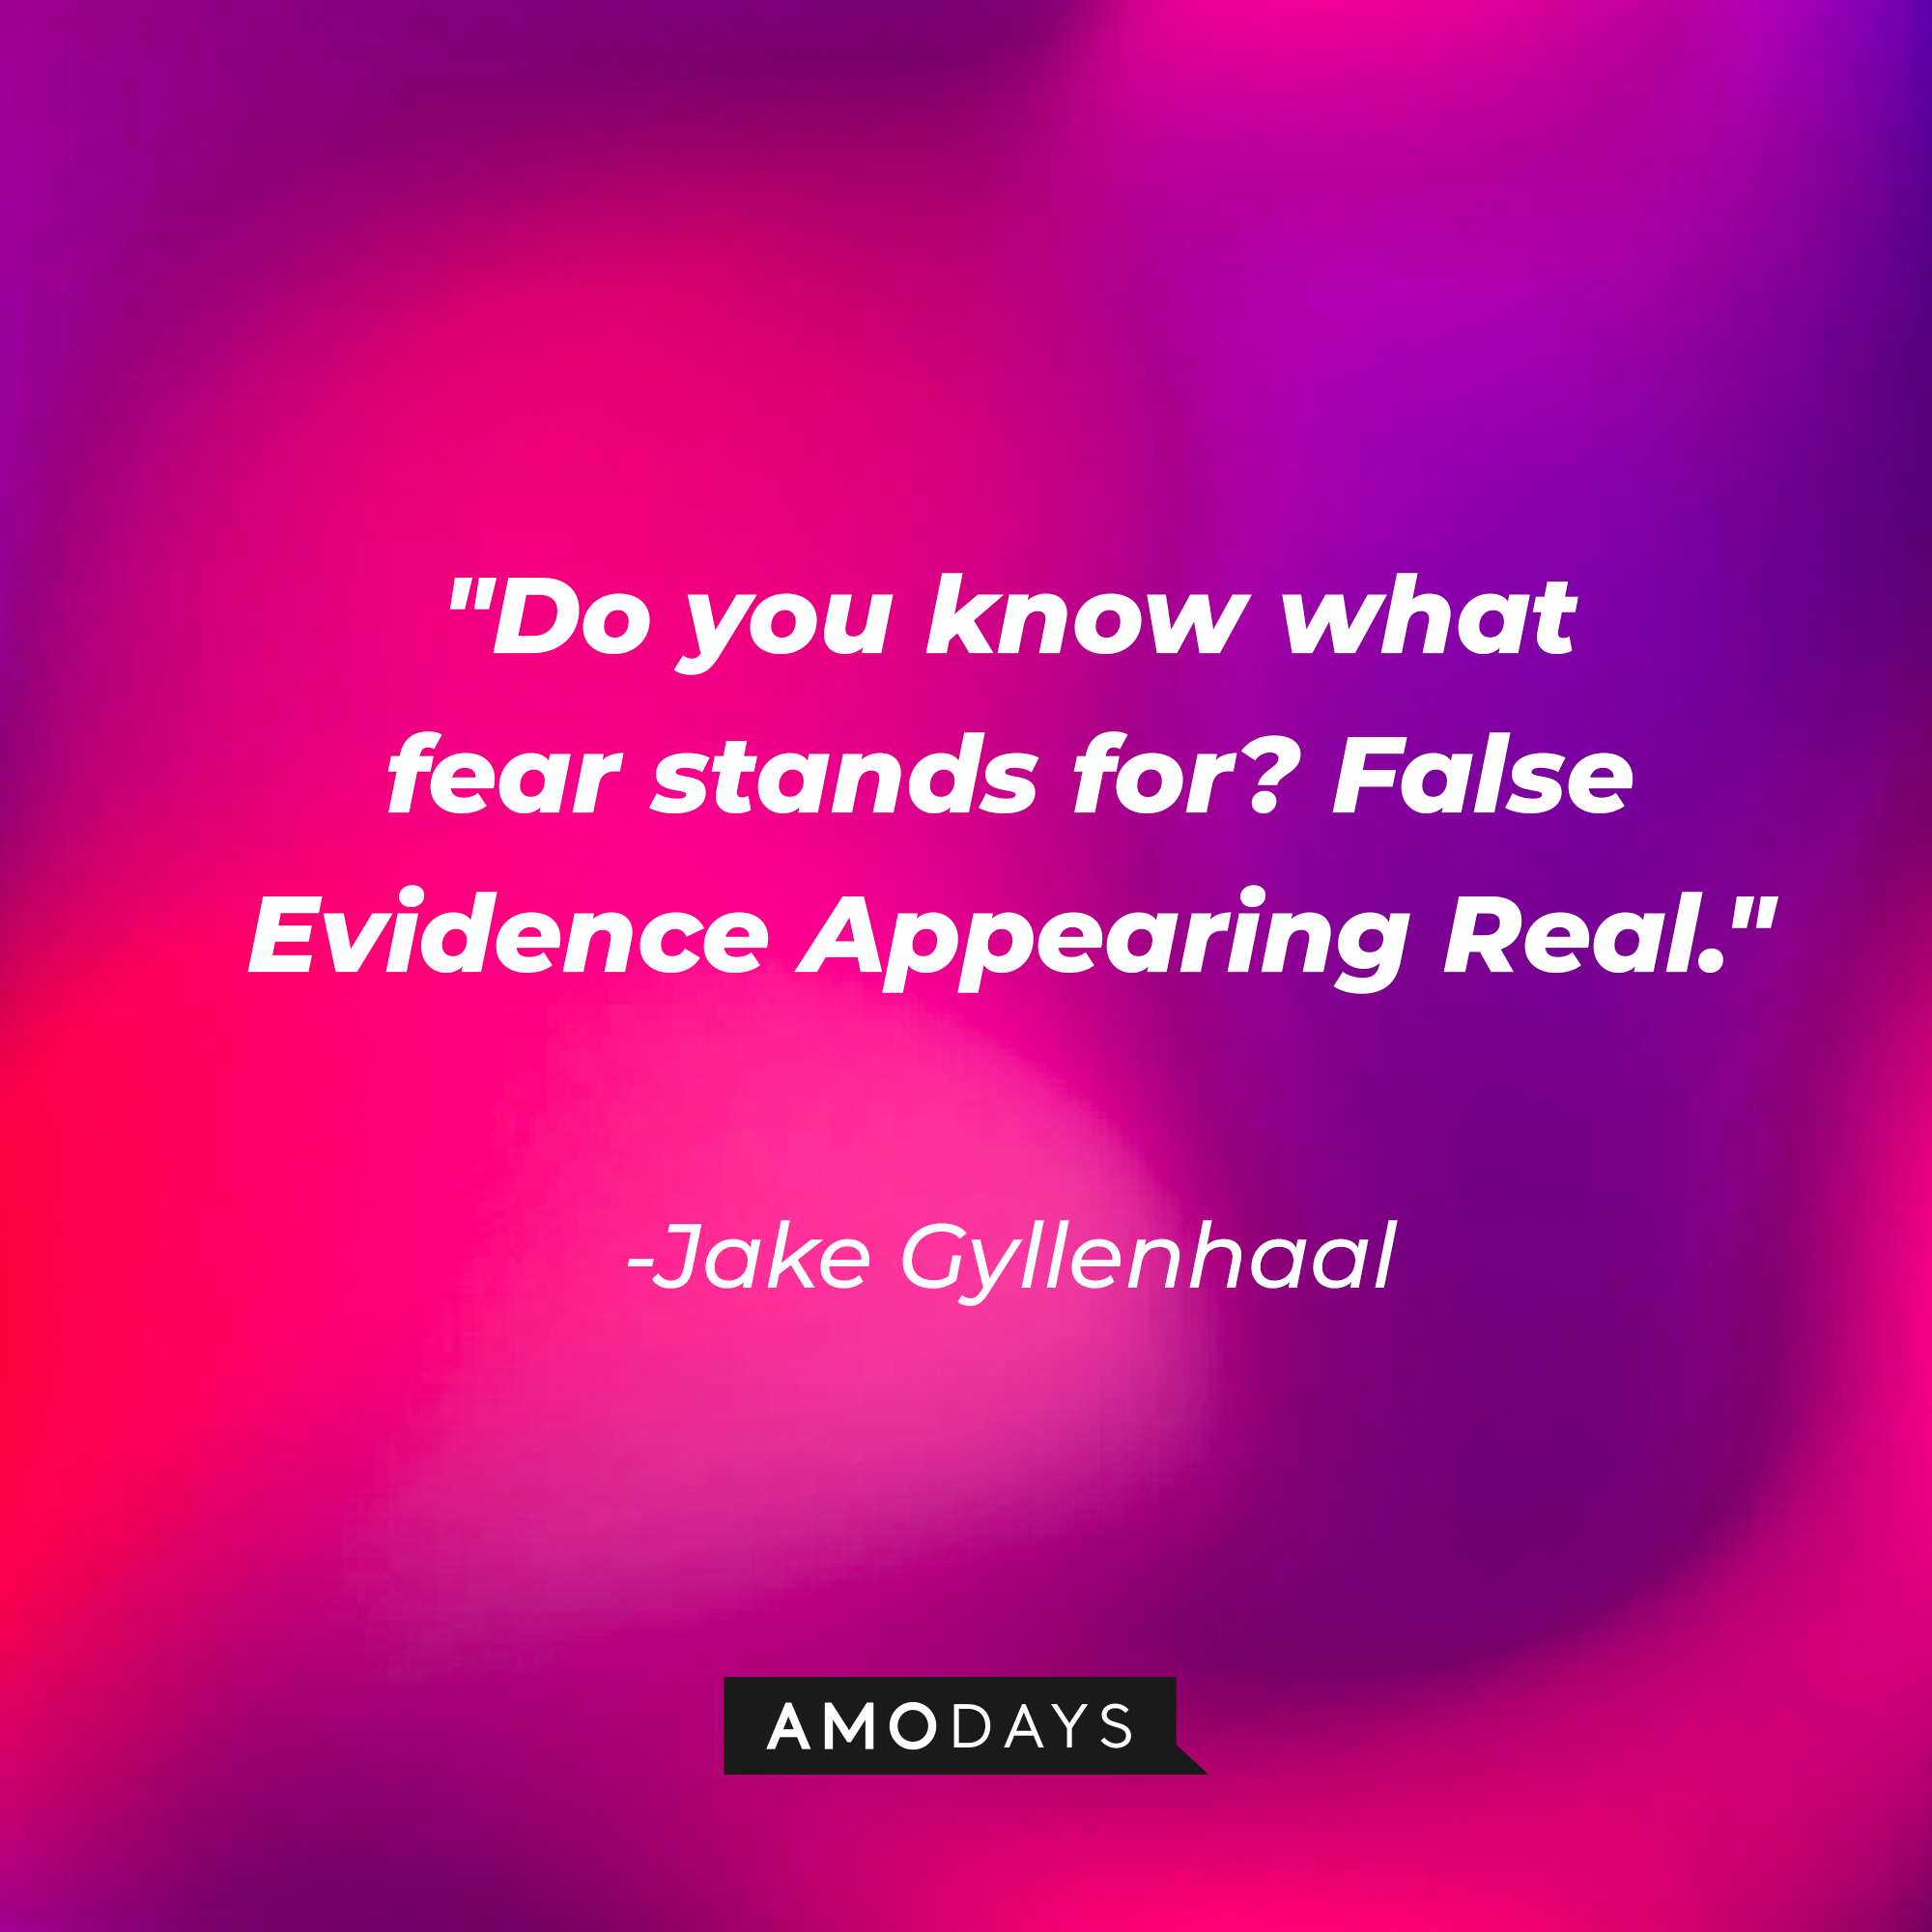 Jake Gyllenhaal's quote: "Do you know what fear stands for? False Evidence Appearing Real." | Source: AmoDays